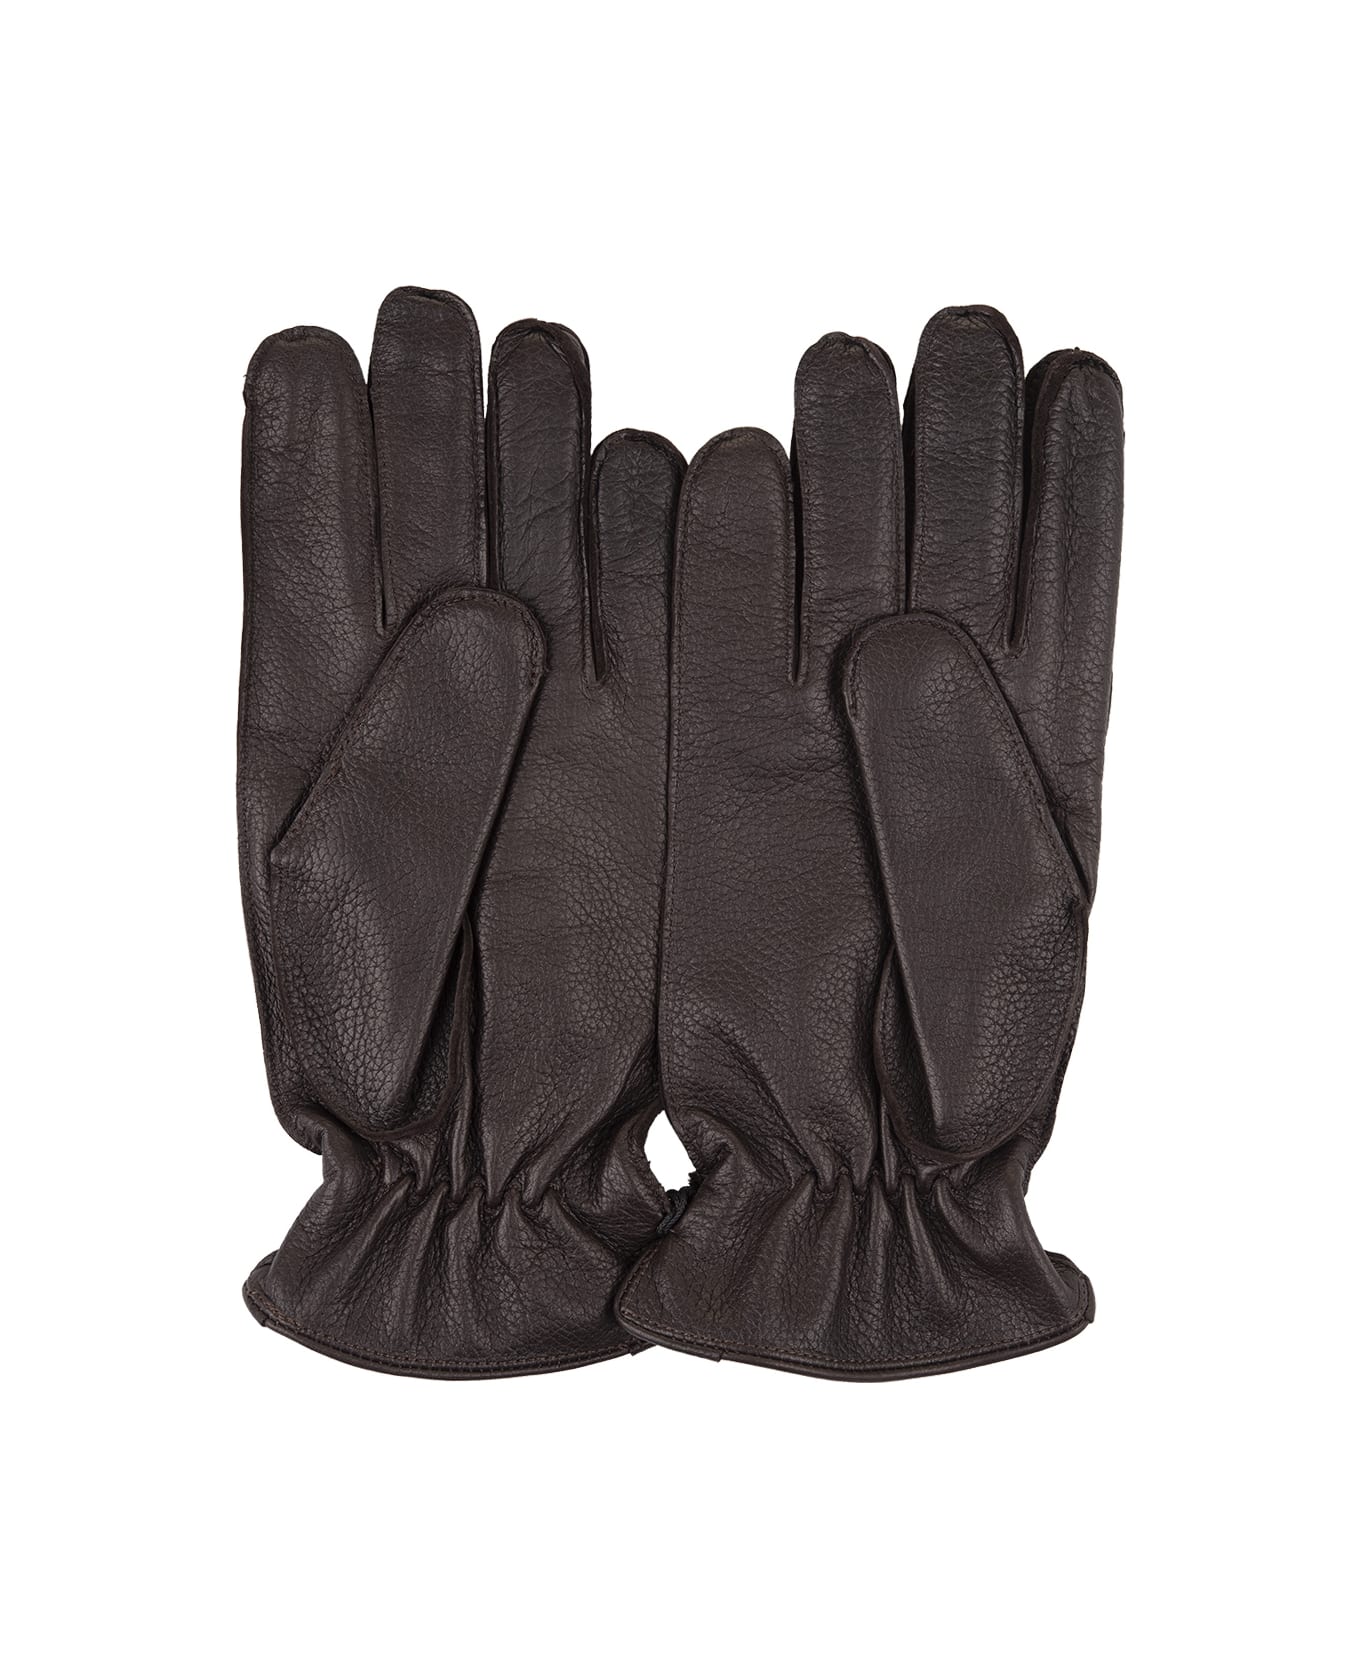 Orciani Drummed Gloves In Dark Brown Leather - Brown 手袋